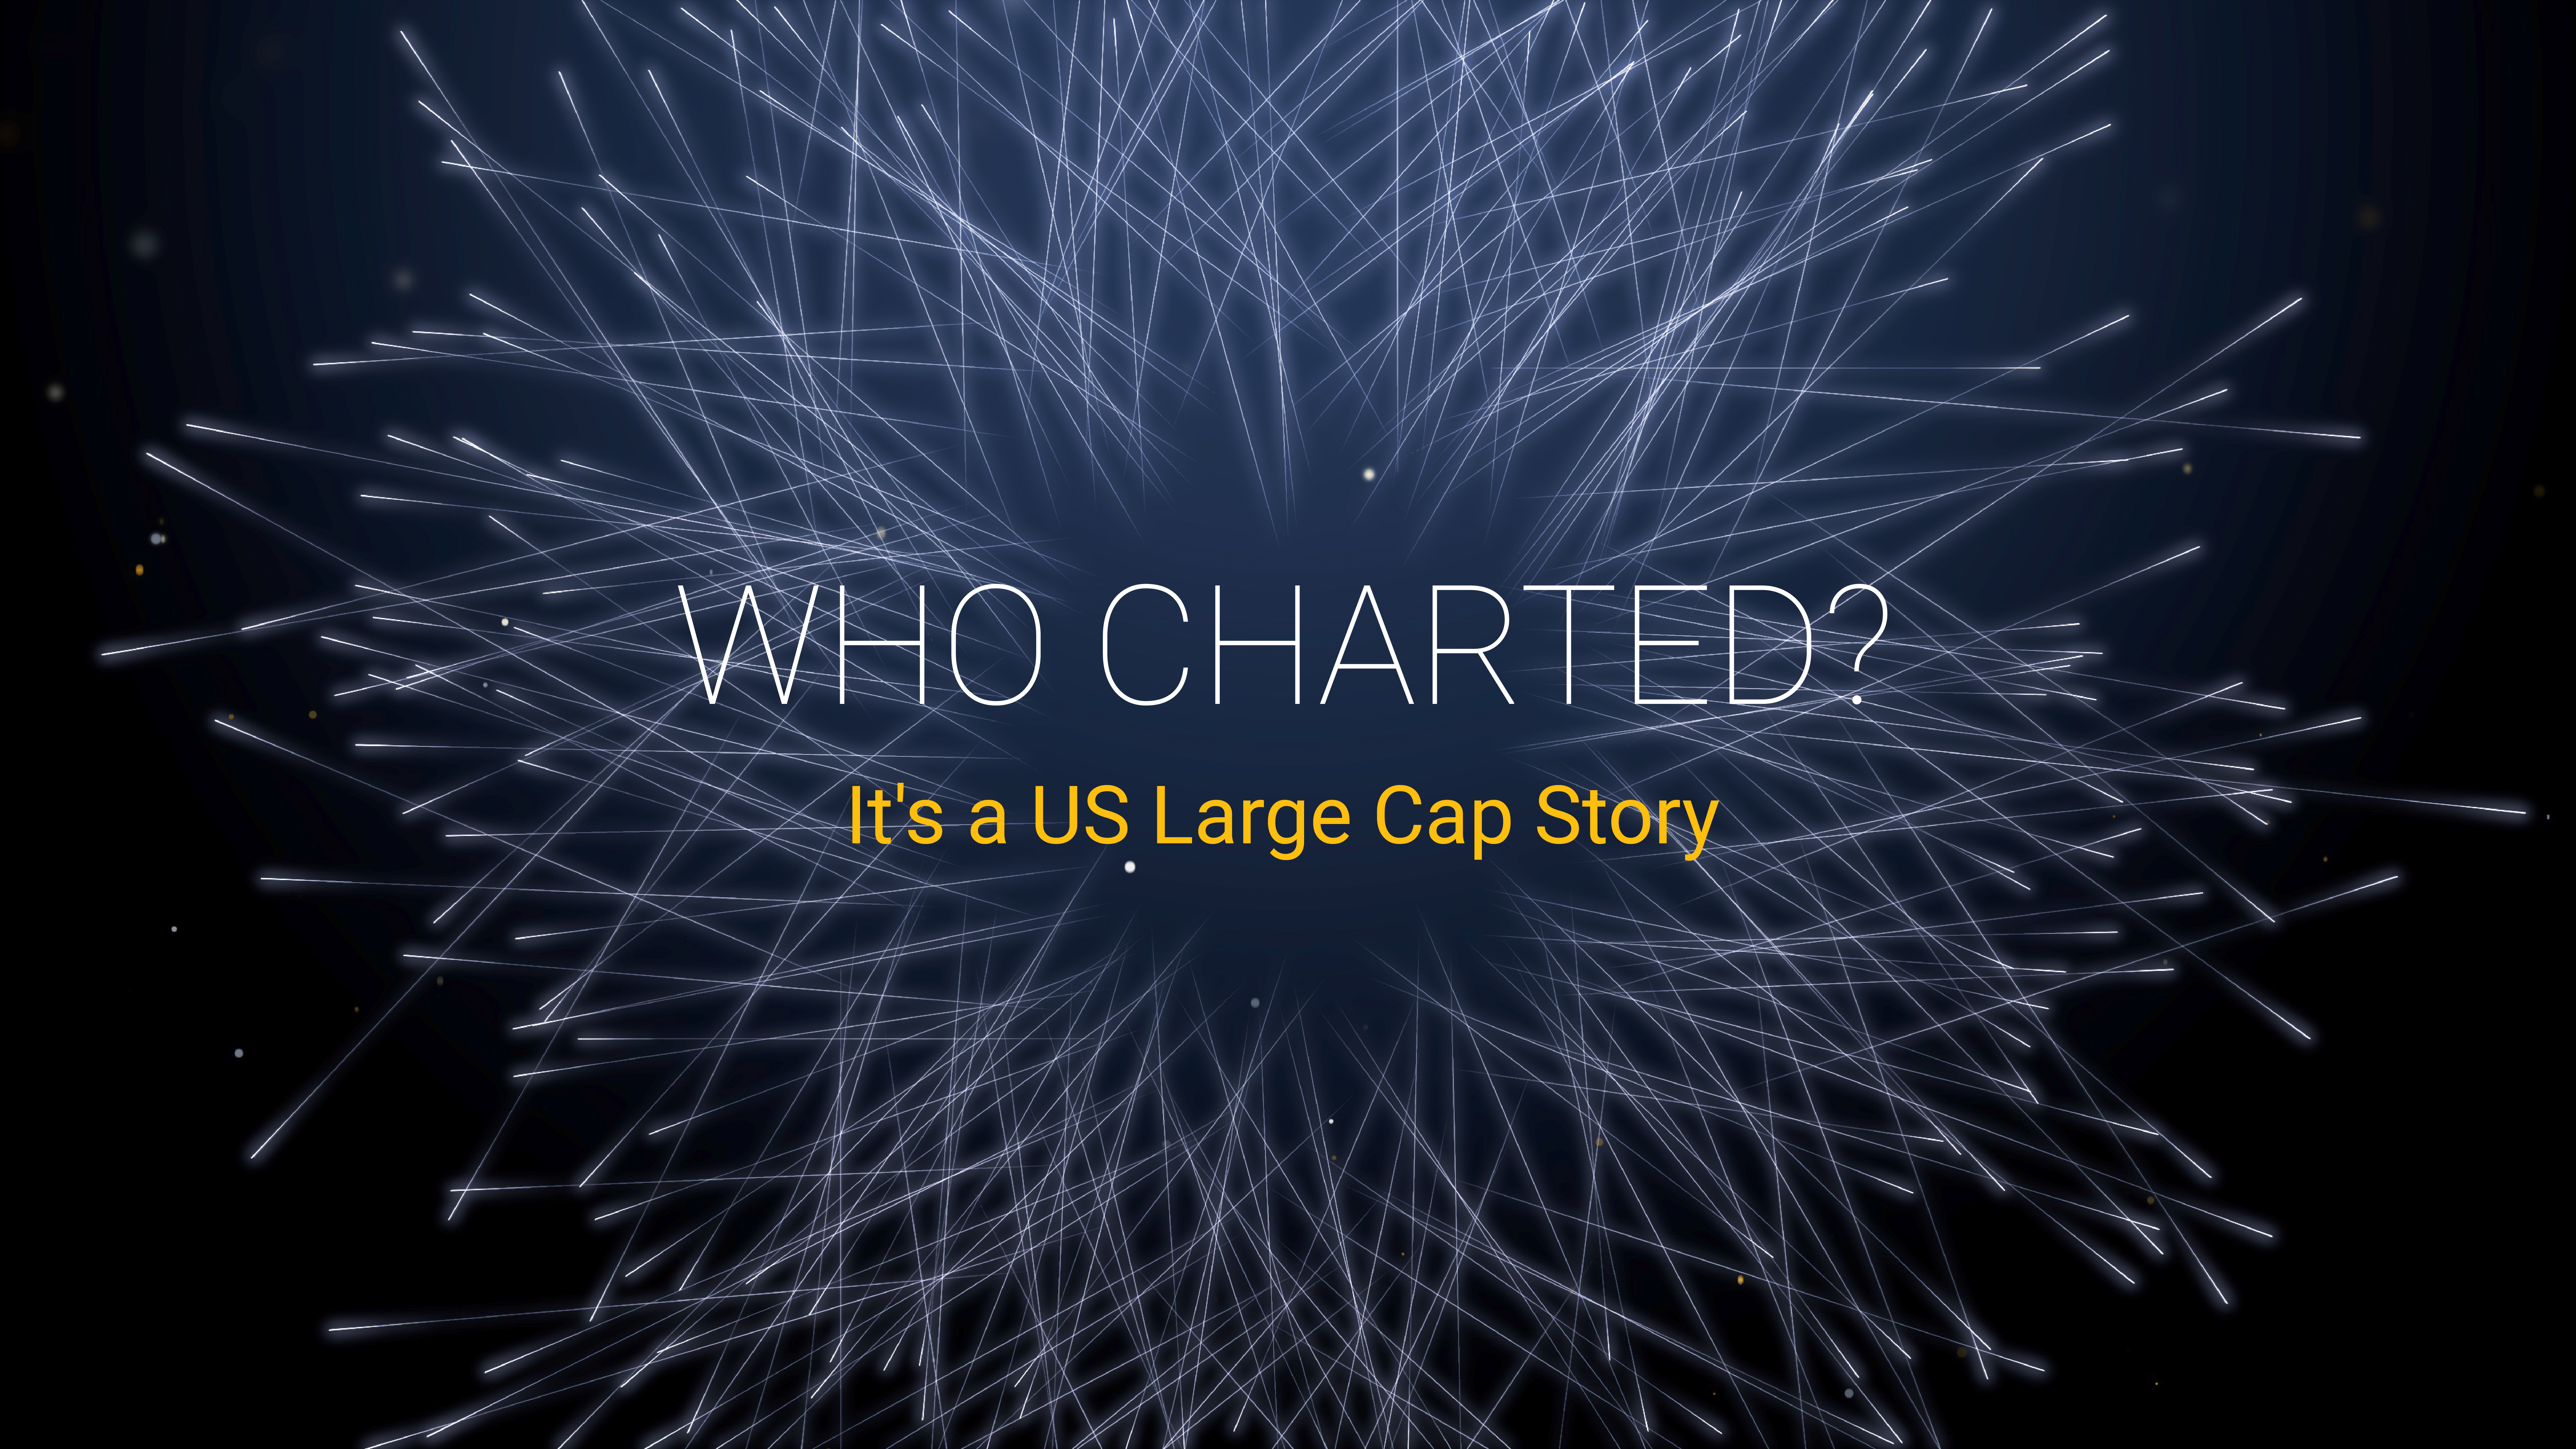 Who Charted? (E6) It’s a US Large Cap Story